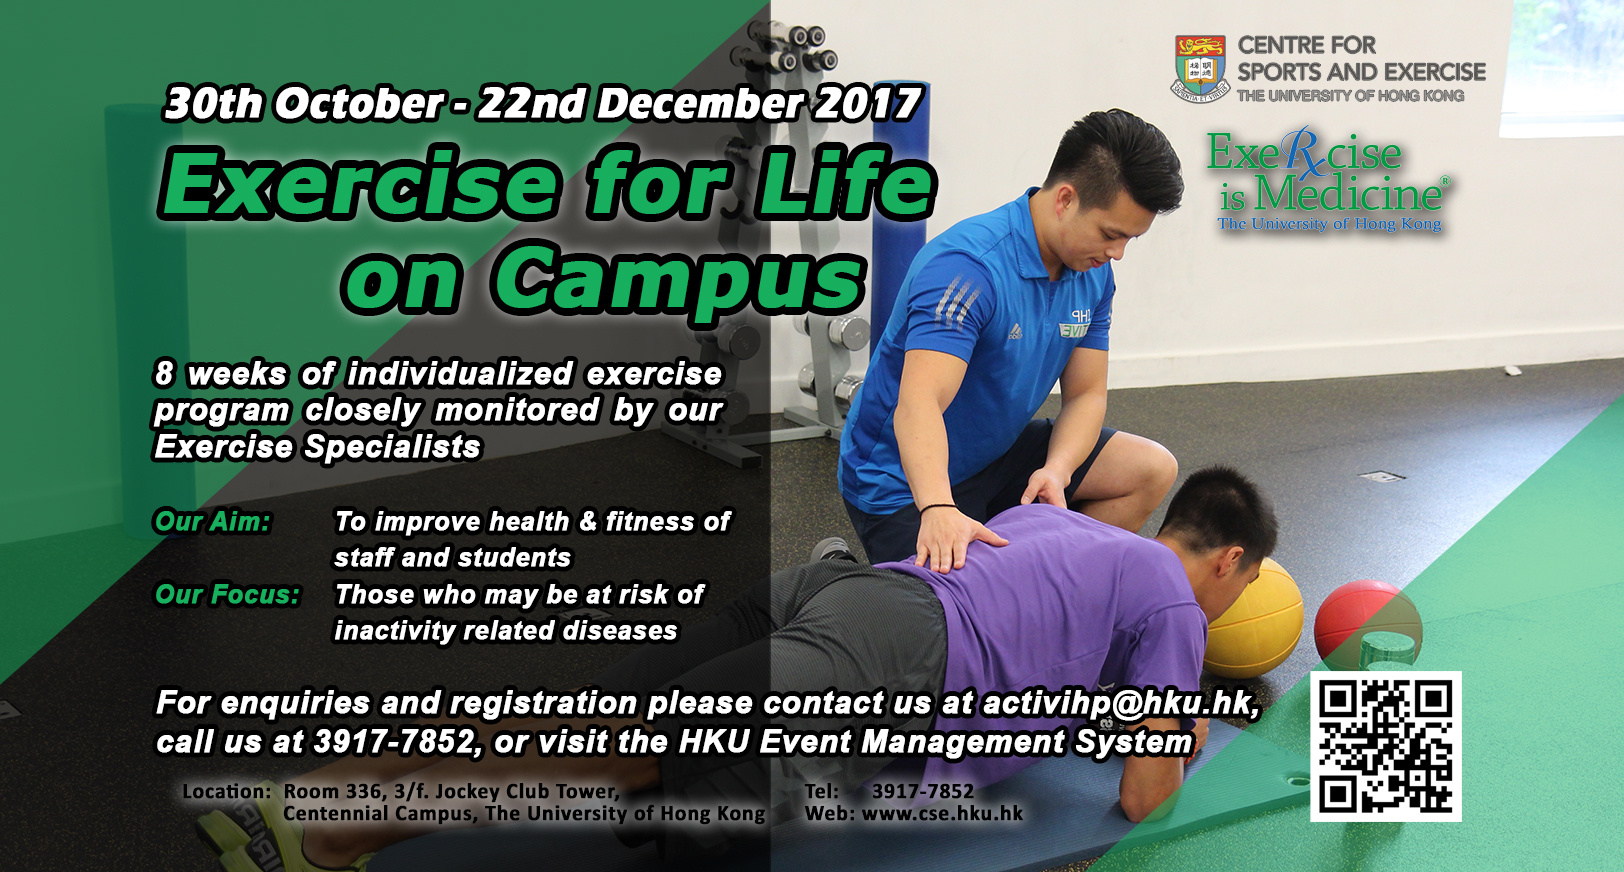 Exercise for Life on Campus Programme